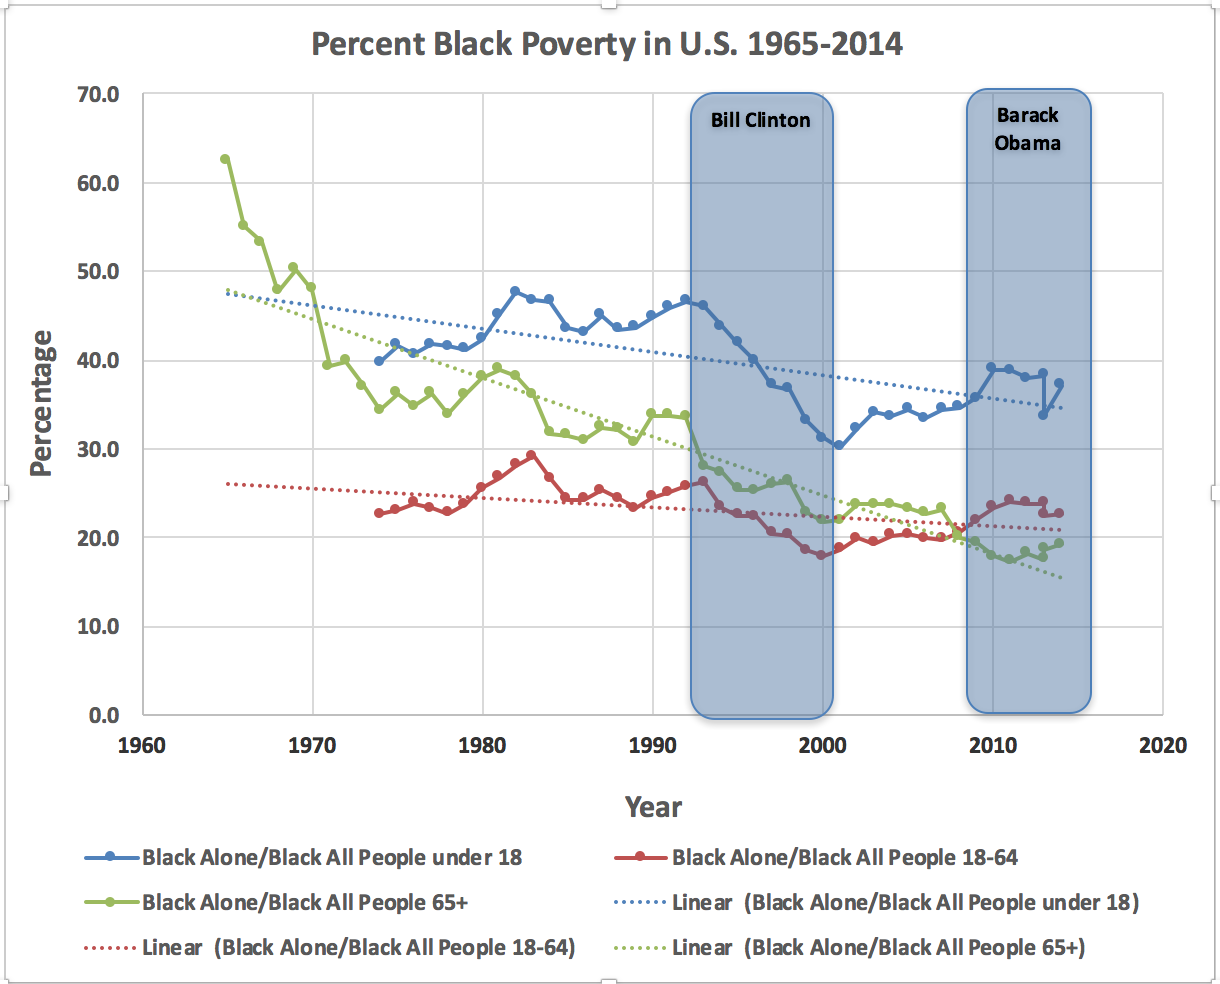 Source for Data: https://www.census.gov/data/tables/time-series/demo/income-poverty/historical-poverty-people.html (See Table 3: Poverty Status of People, by Age, Race, and Hispanic Origin